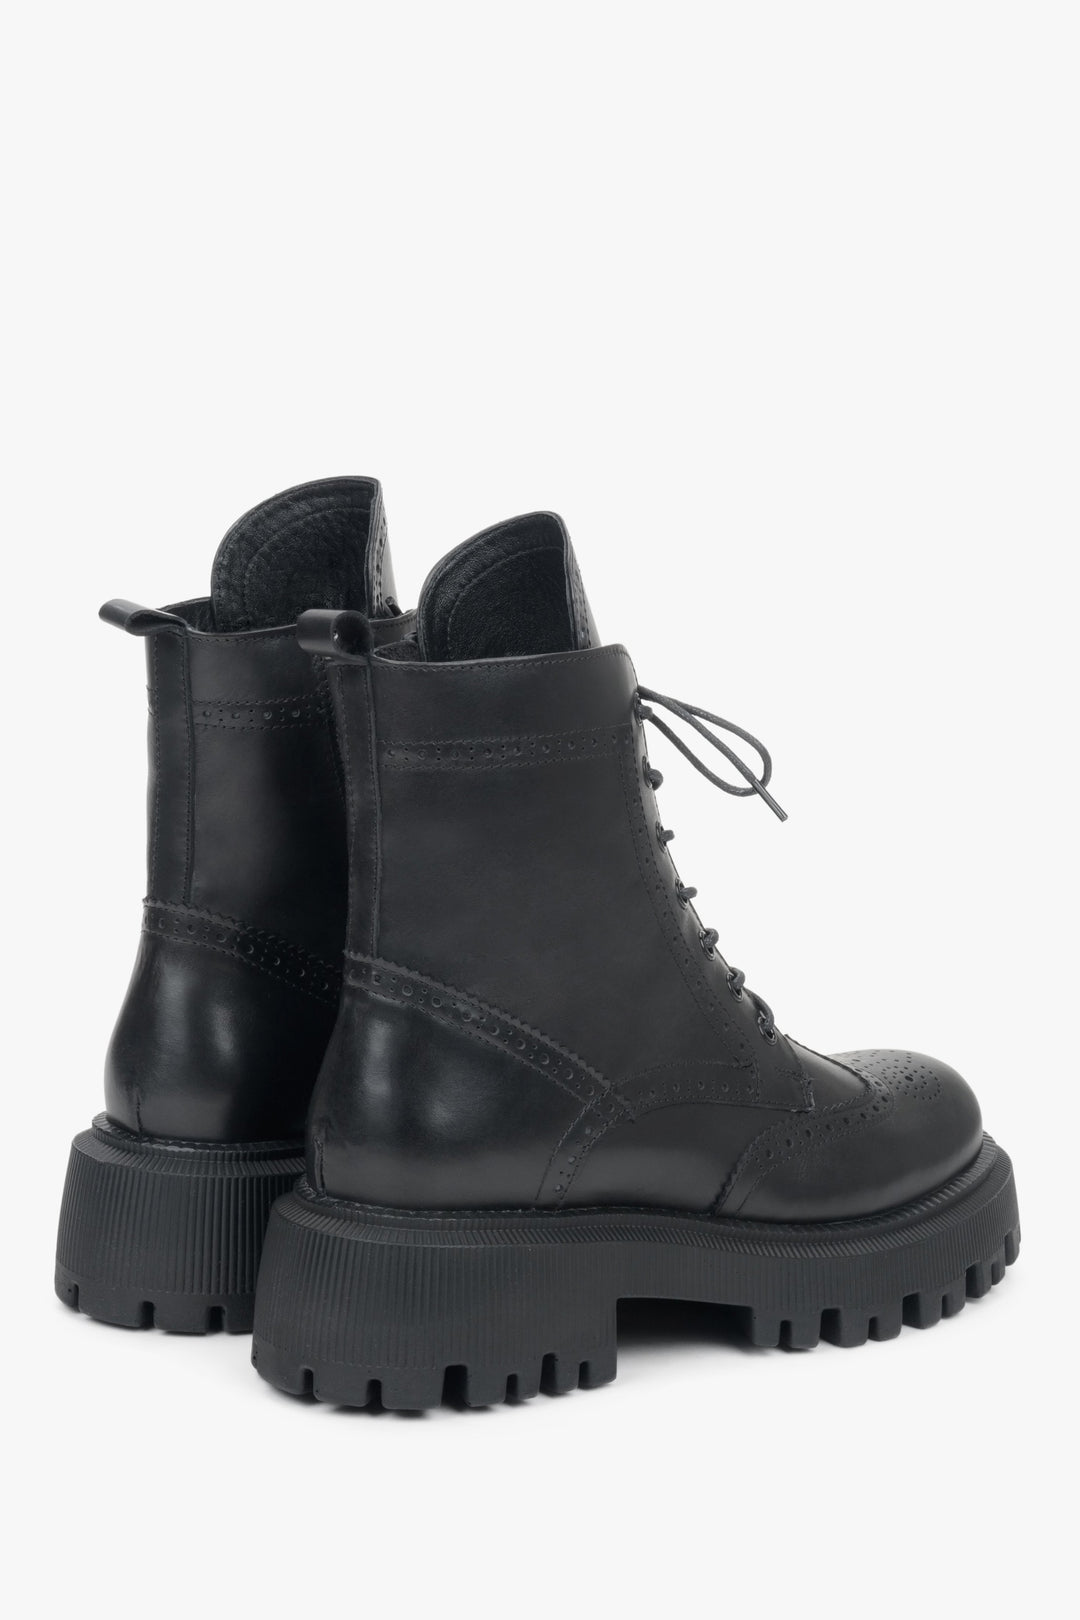 Women's black leather ankle boots with decorative lacing - close-up of the side and heel lines of the boots.